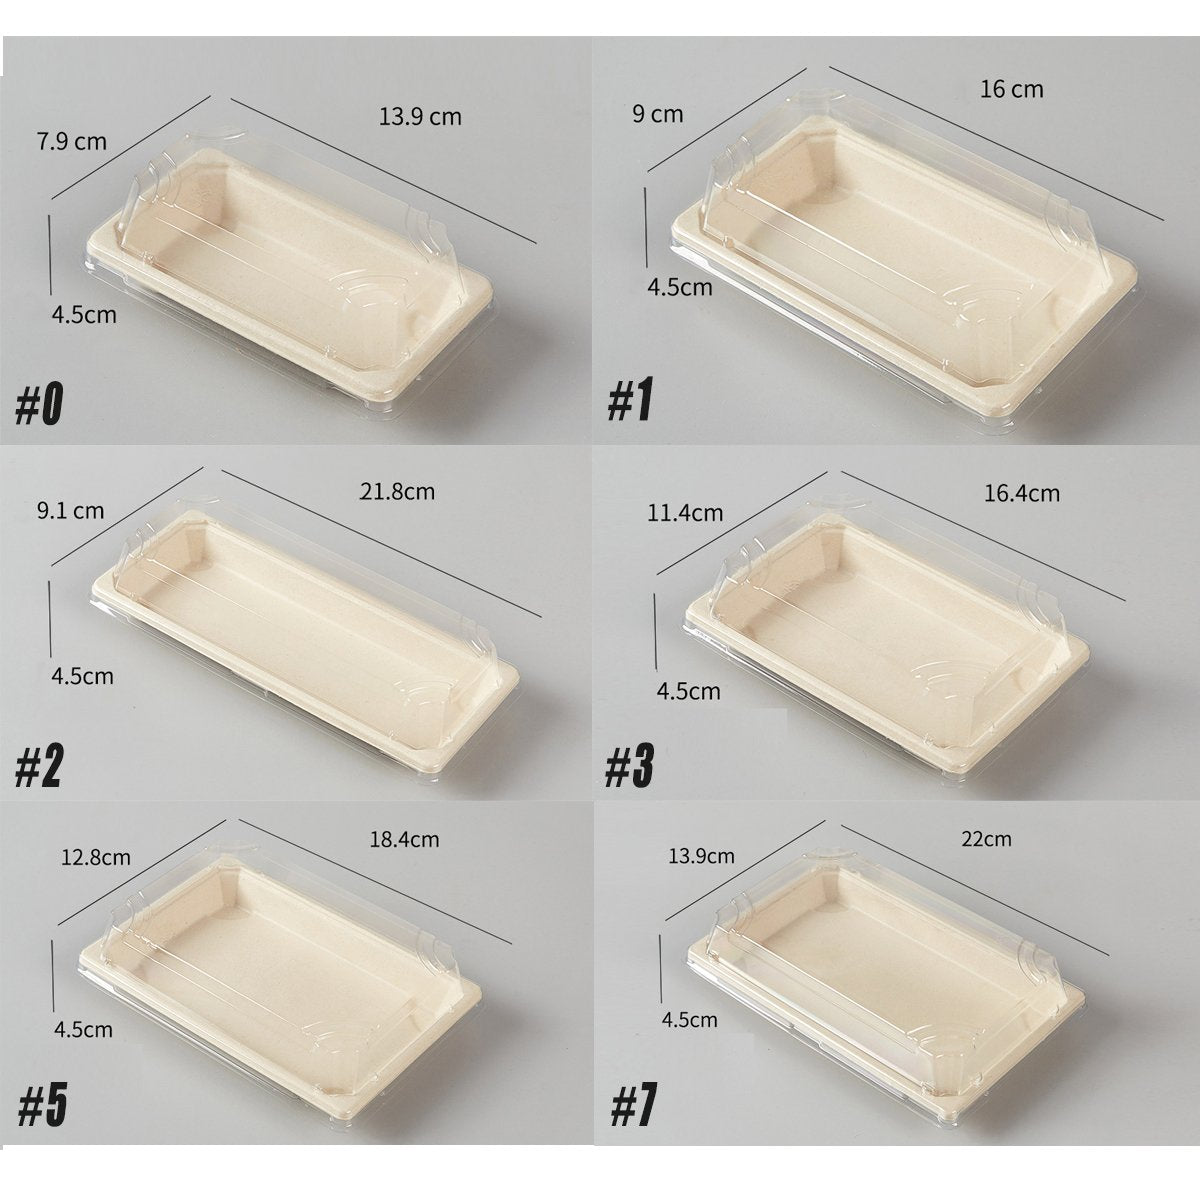 Enhance Your Takeaways with Eco-Friendly Disposable Sushi Boxes